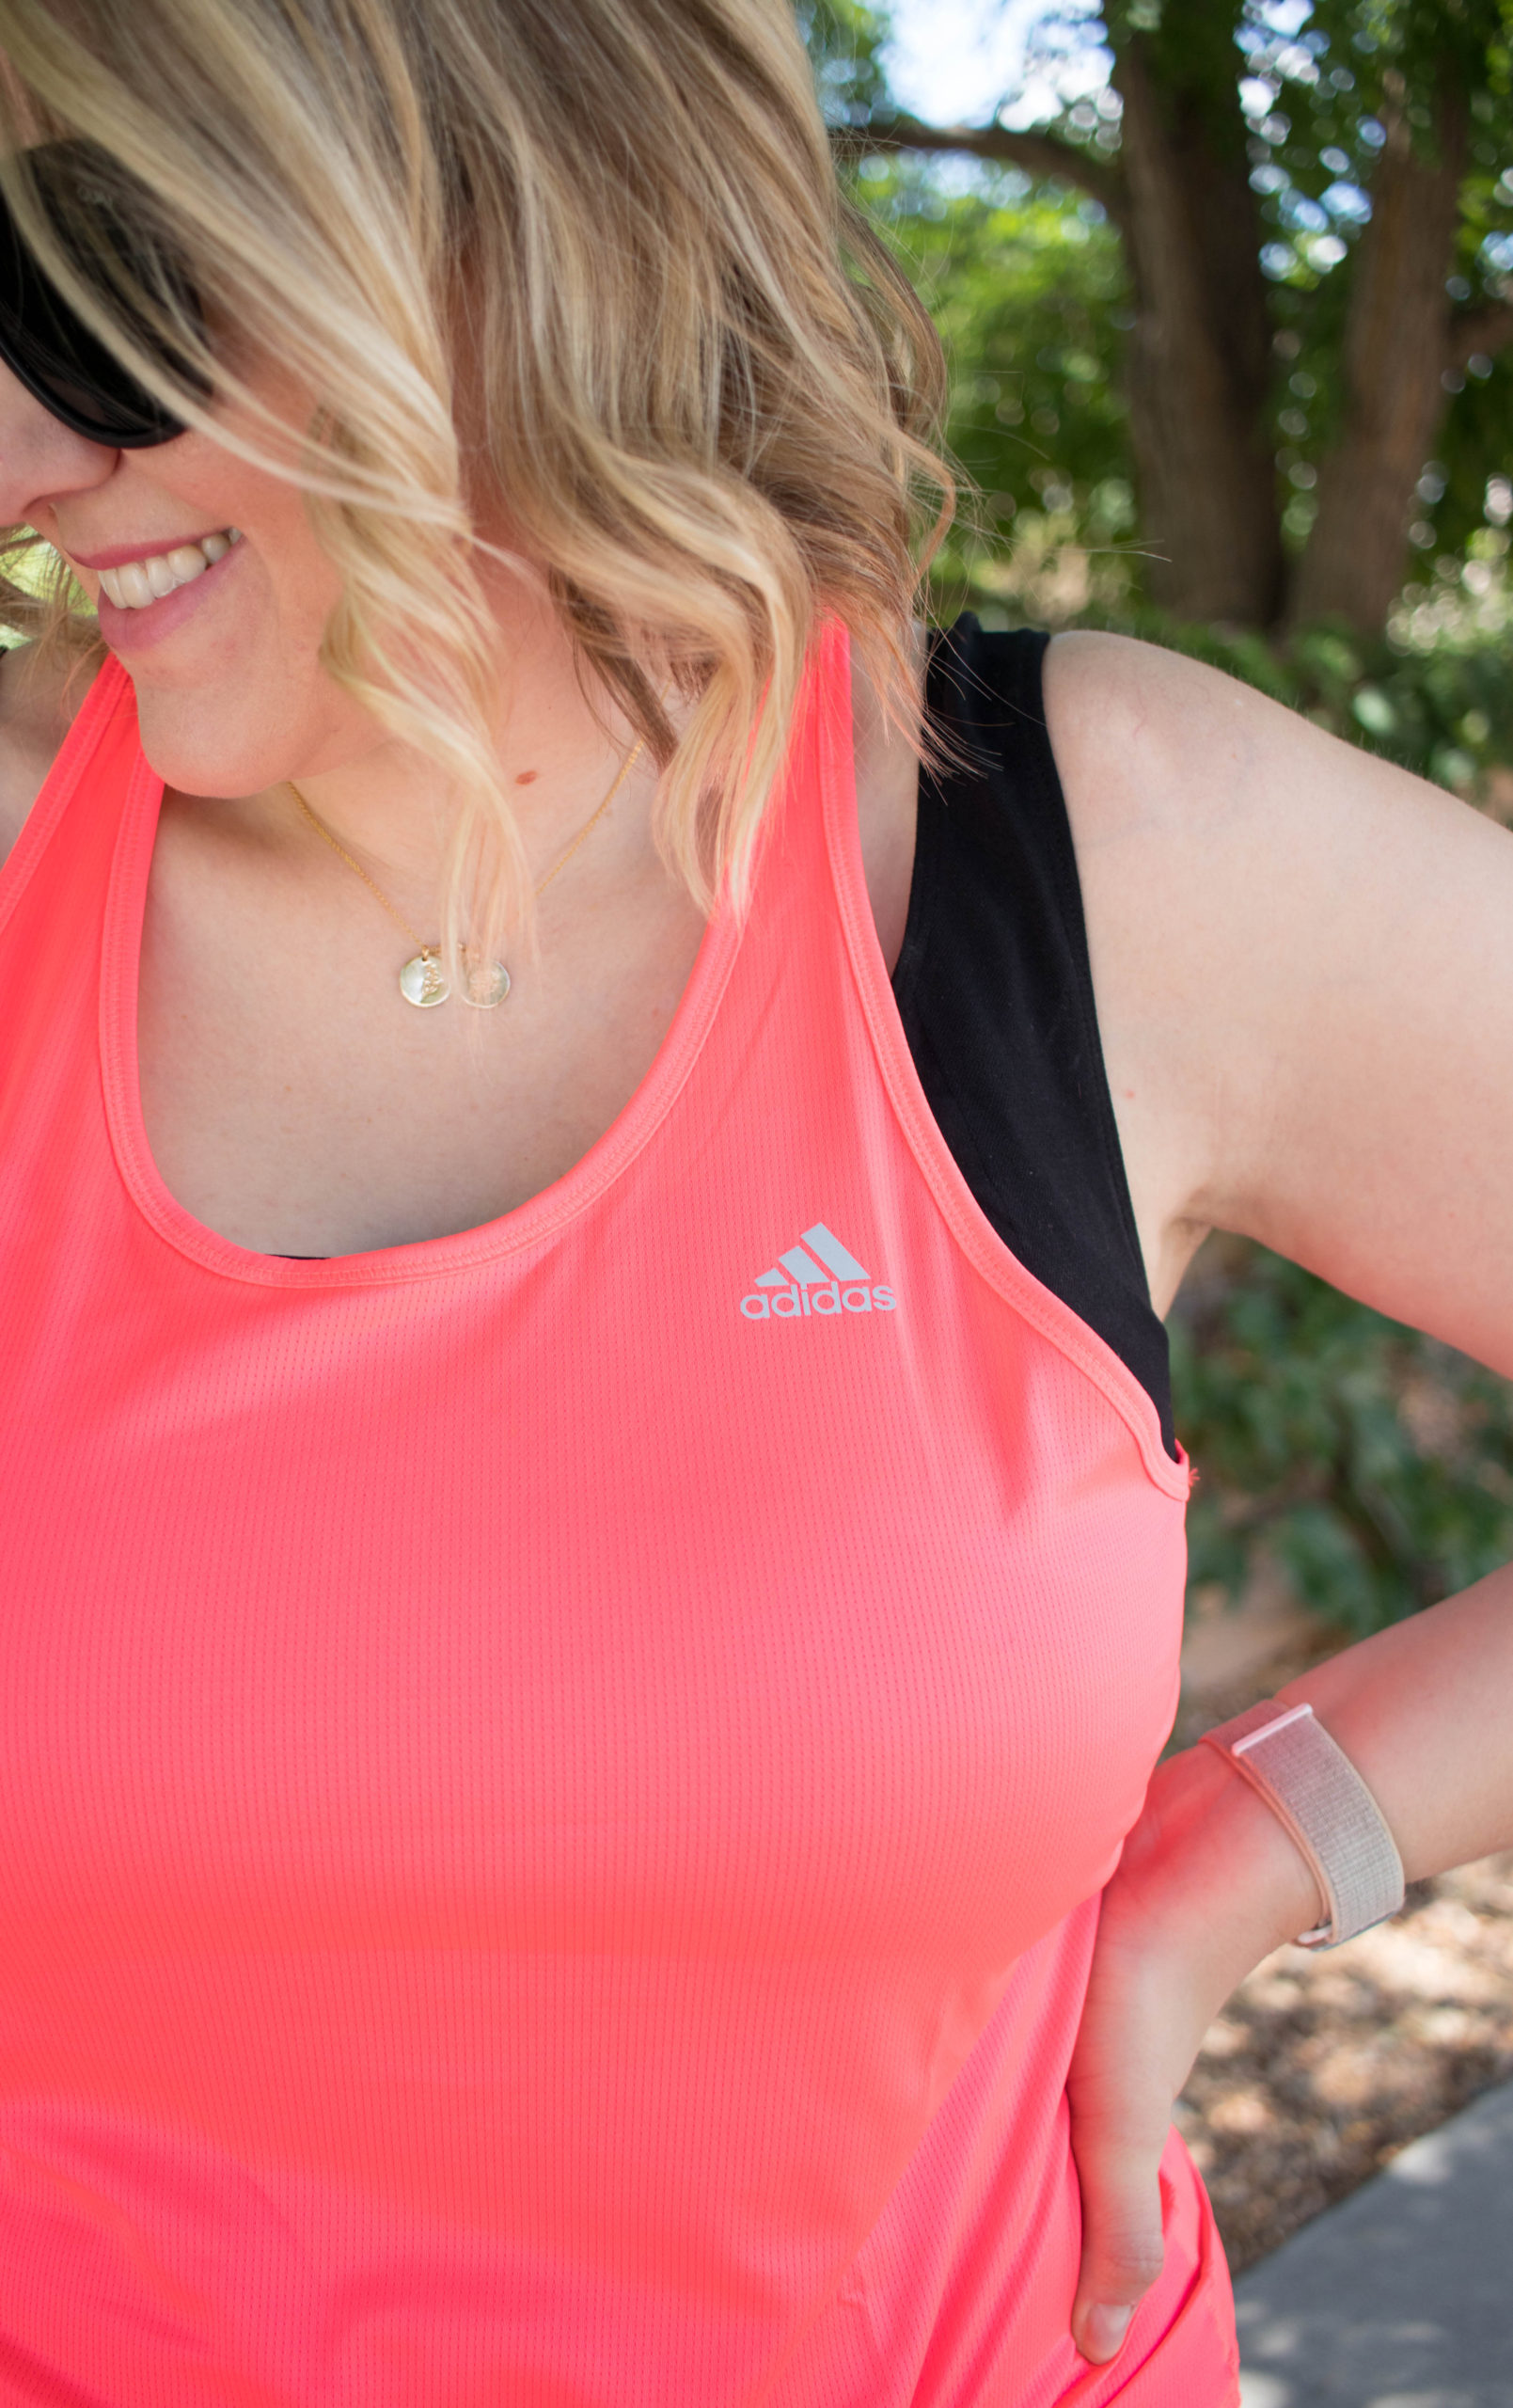 adidas pink athleisure workout outfit #athleticoutfit #adidas #momstyle